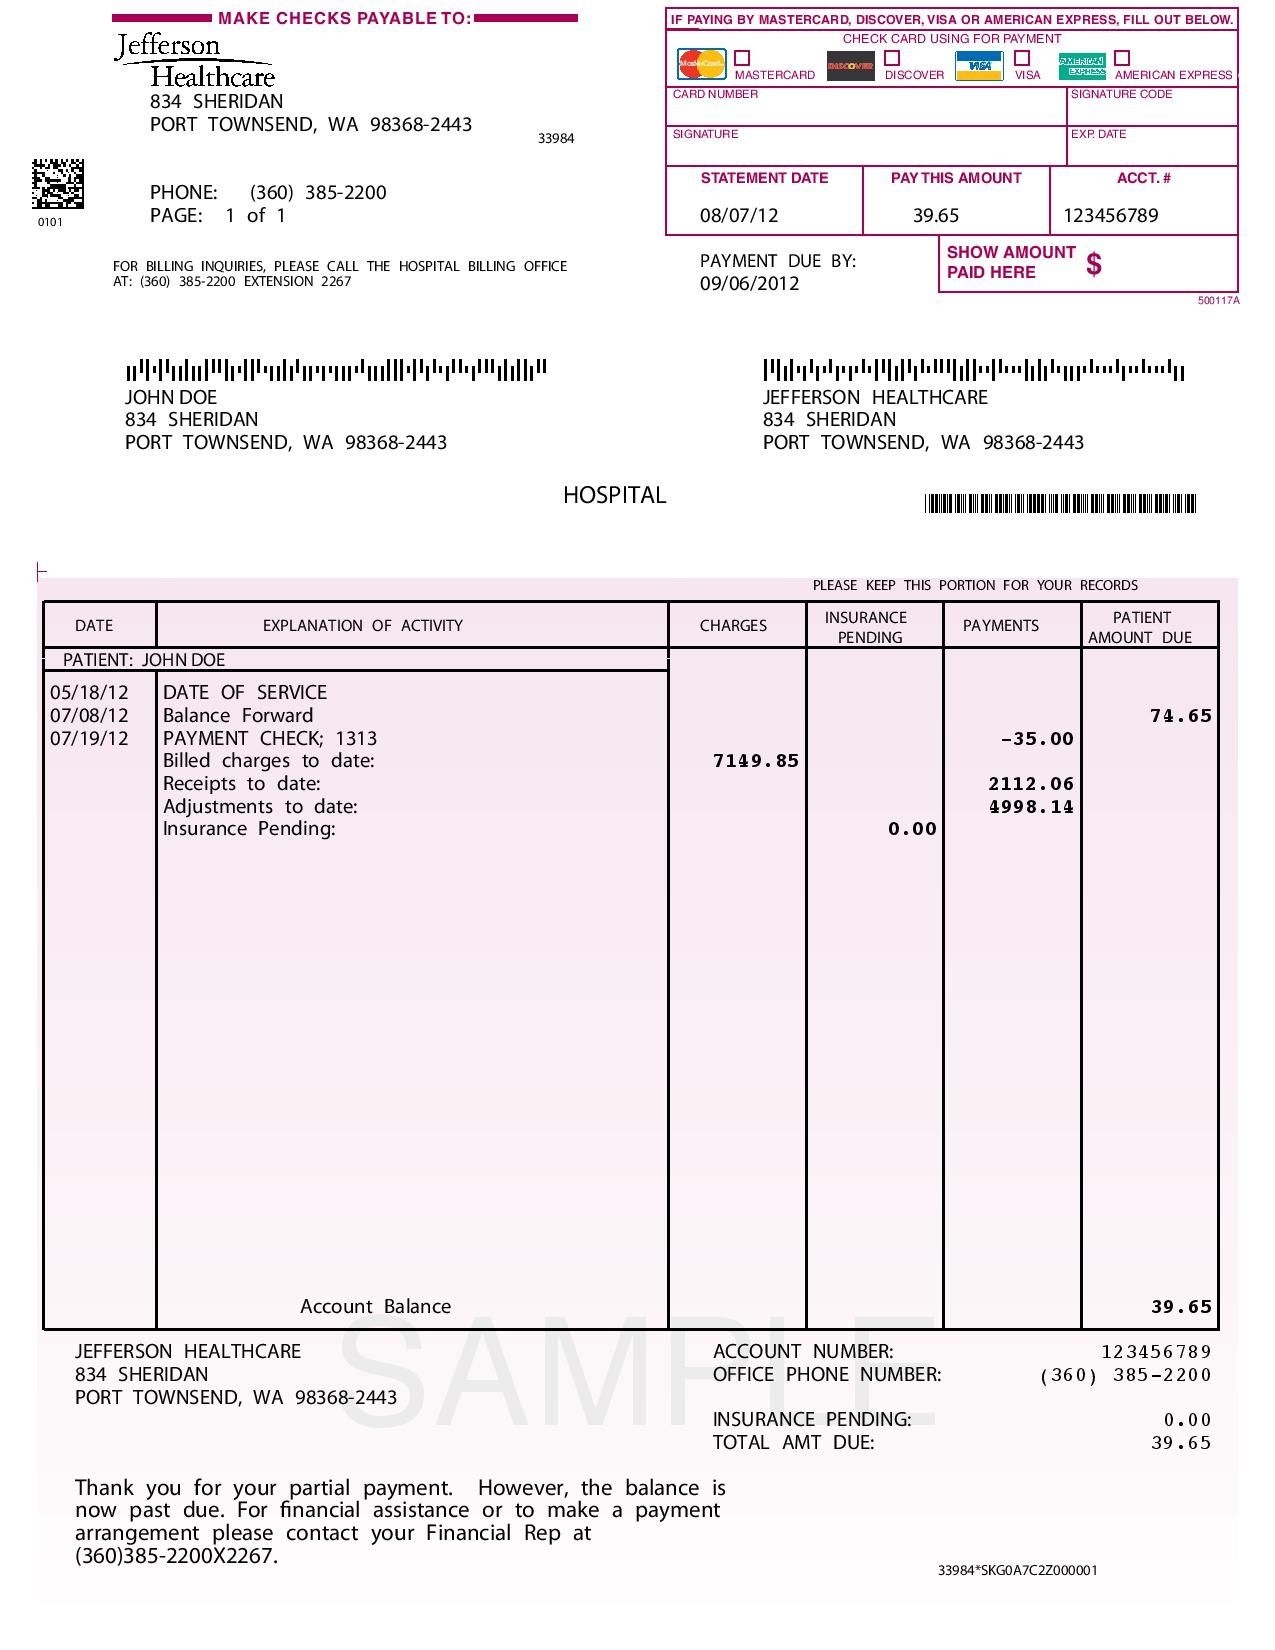 10 best images of sample of invoice for payment sample sample of payment invoice